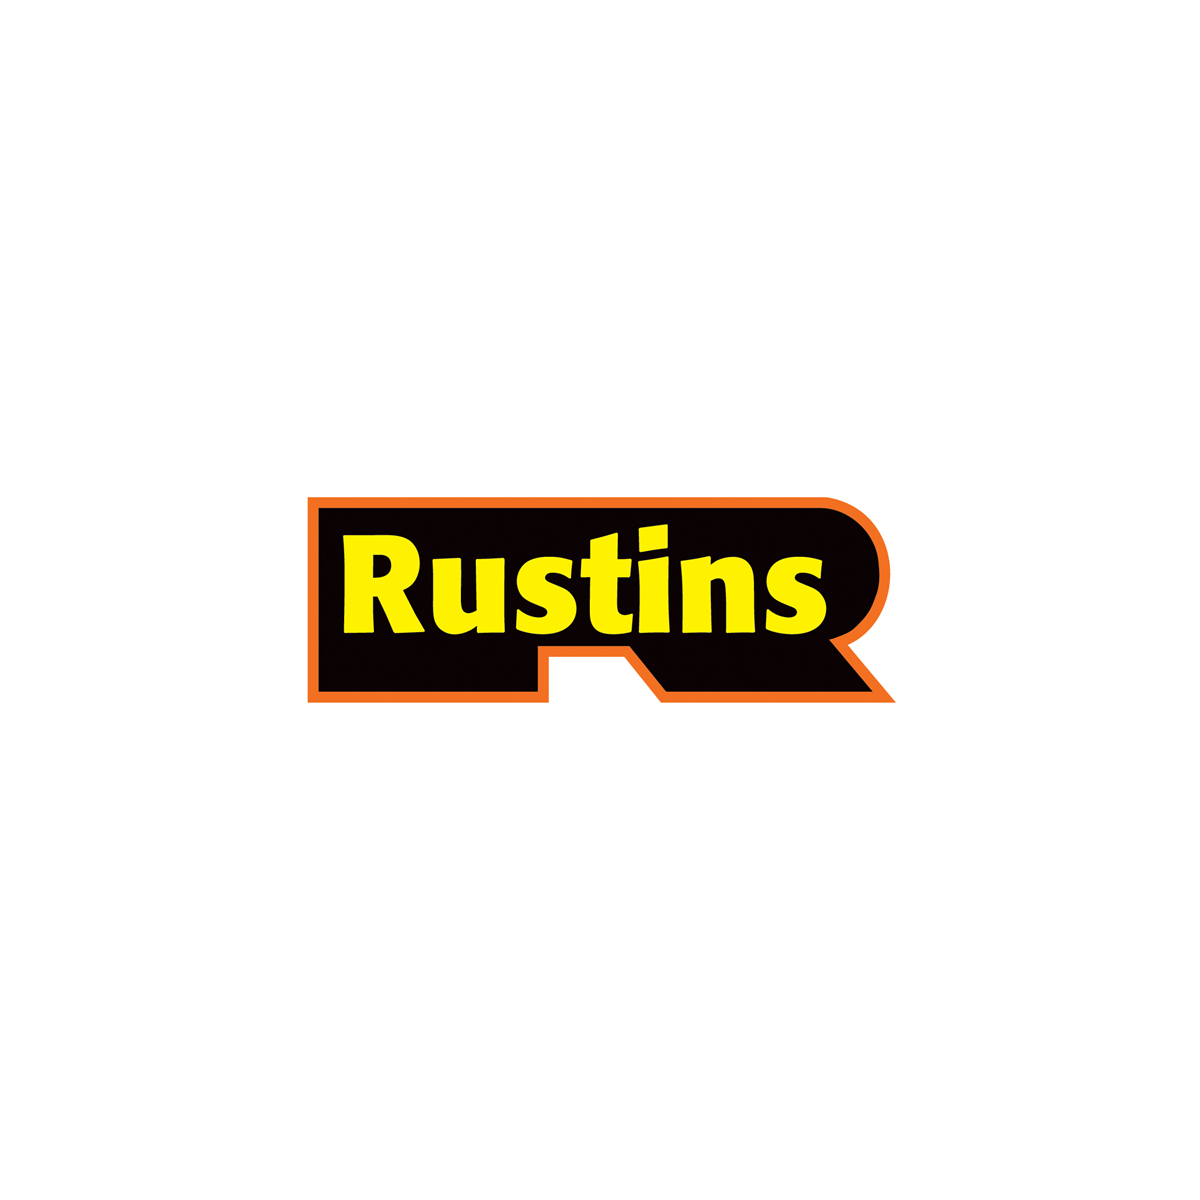 Where to Buy Rustins